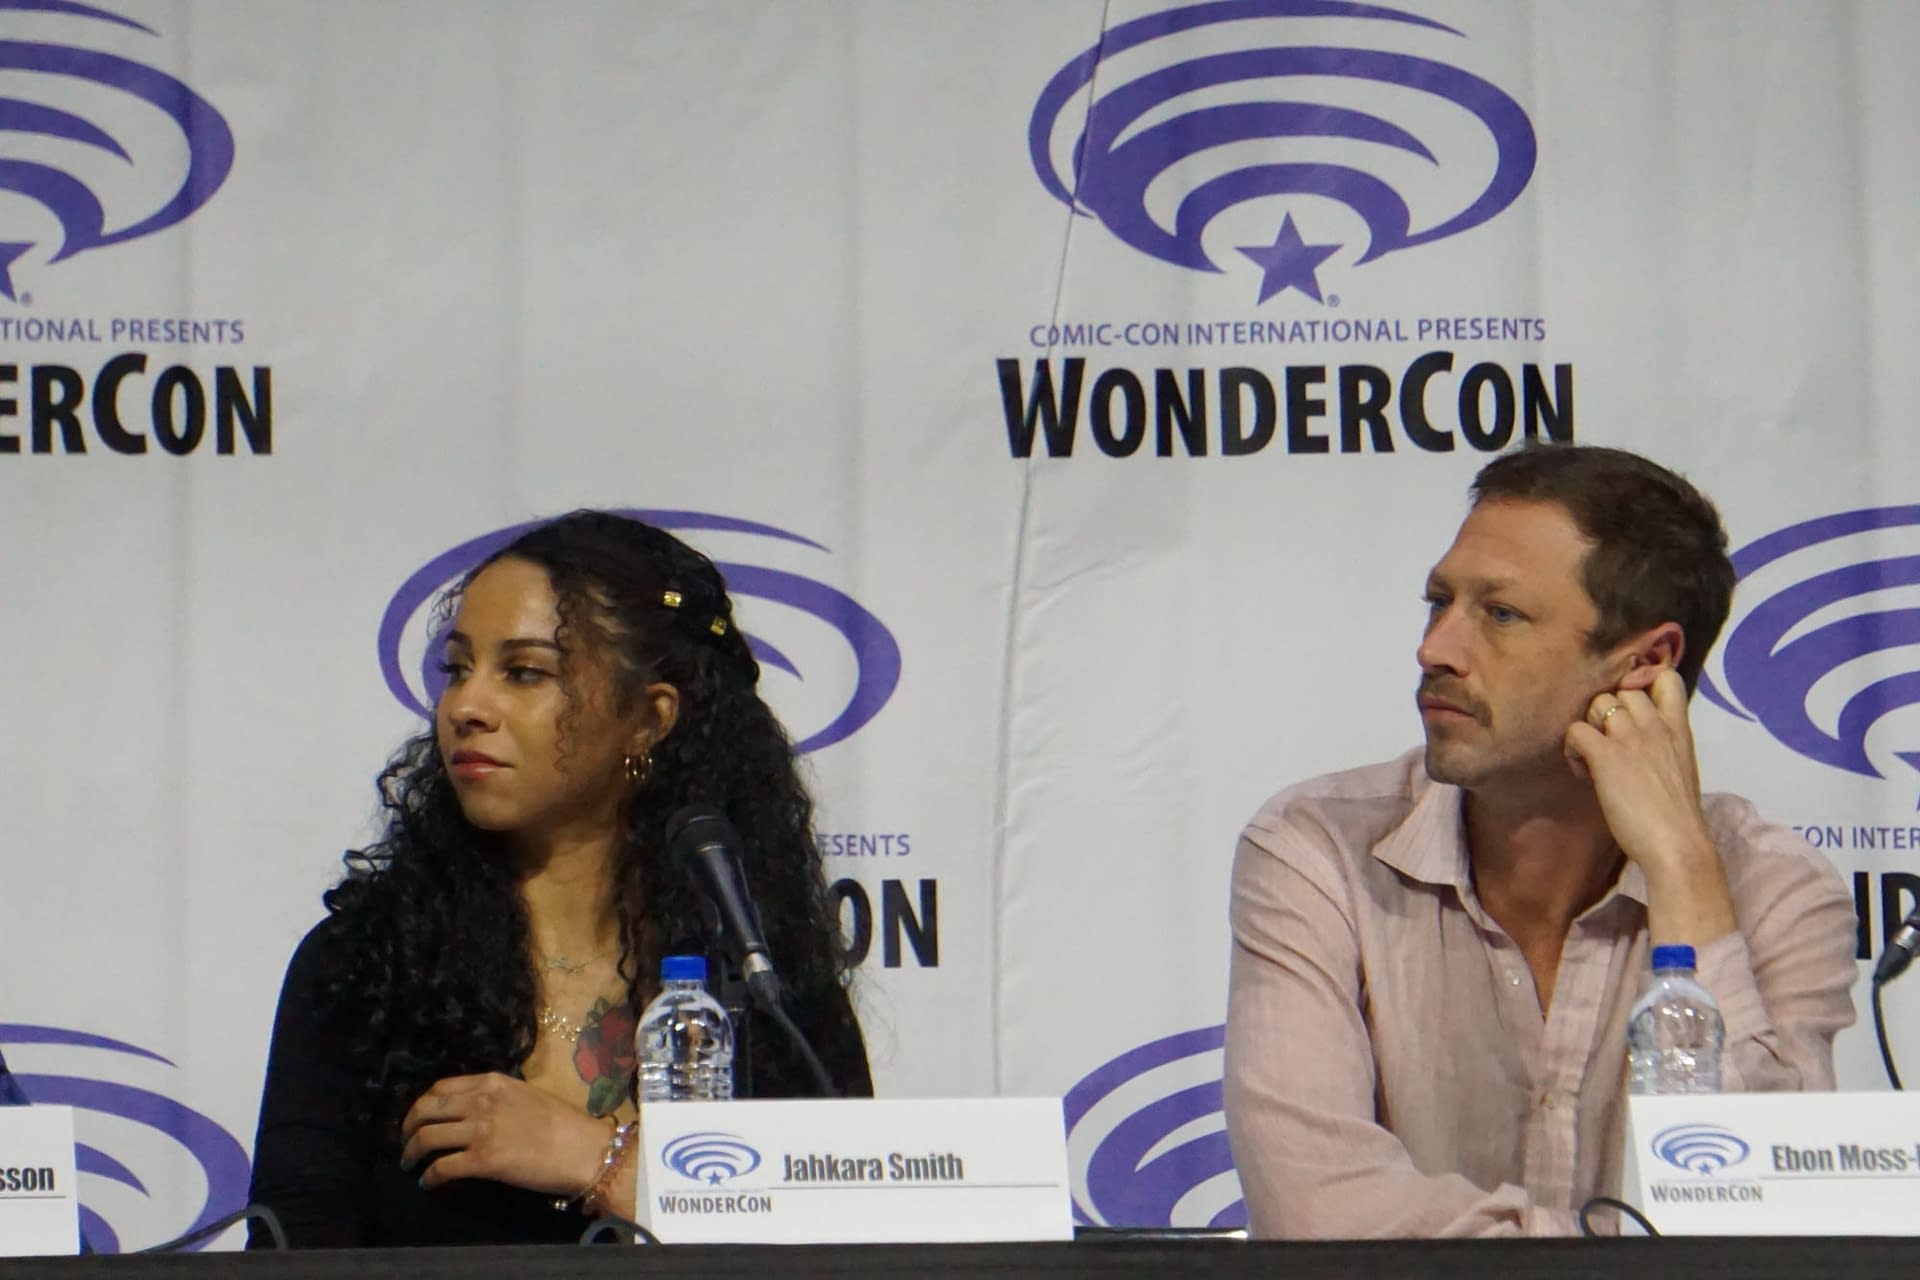 NOS4A2 Wondercon Screening and Panel